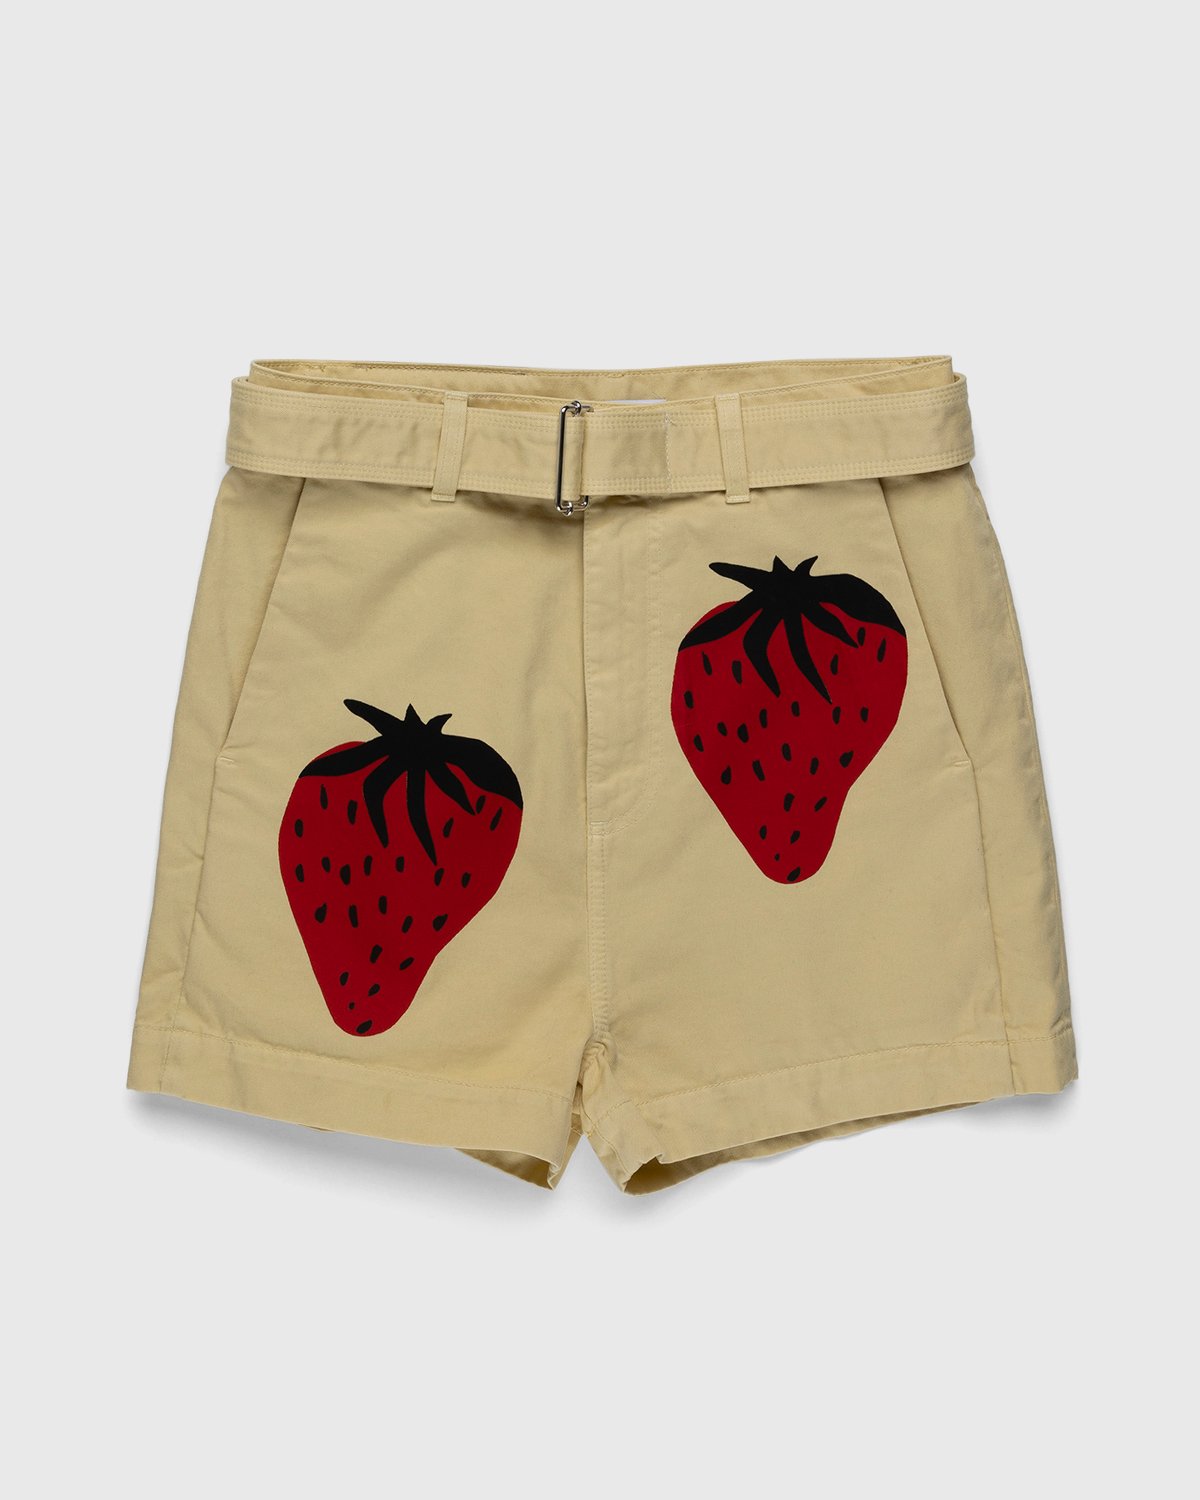 J.W. Anderson - Strawberry Chino Shorts Natural/Red - Clothing - Beige - Image 1